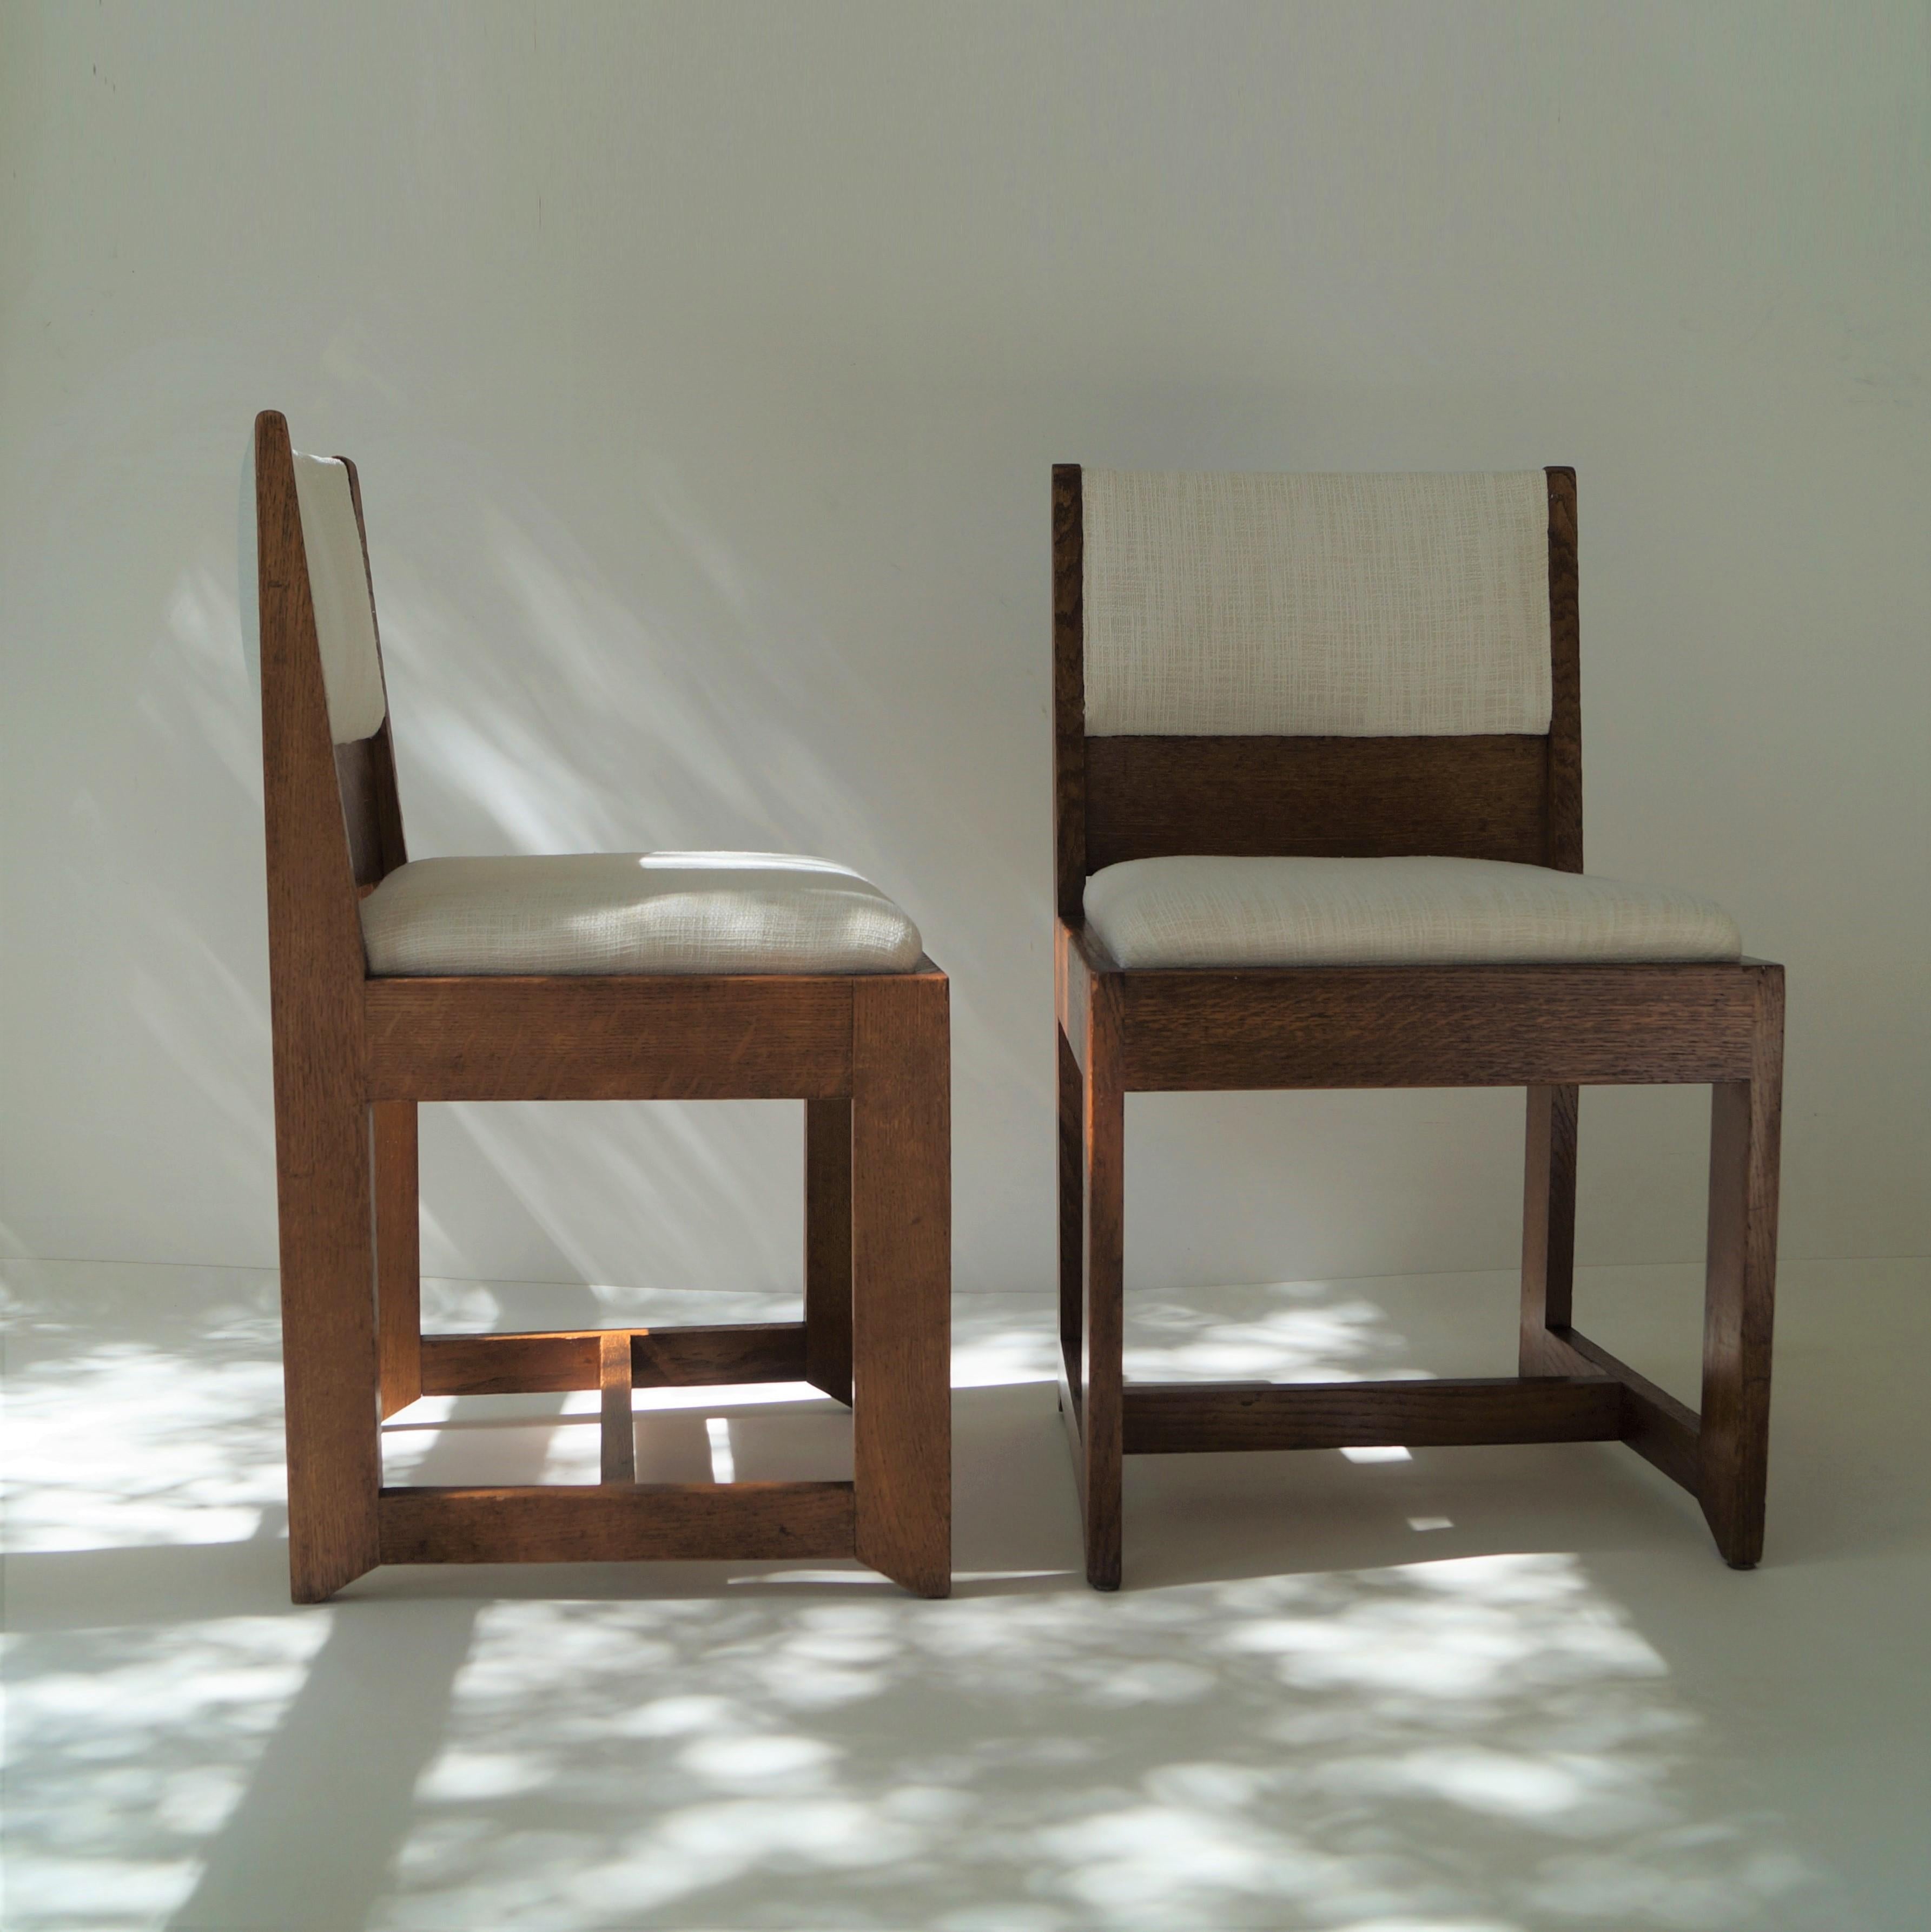 Dutch Art Deco Modernist set of chairs by H. Wouda for Pander, 1924 For Sale 9